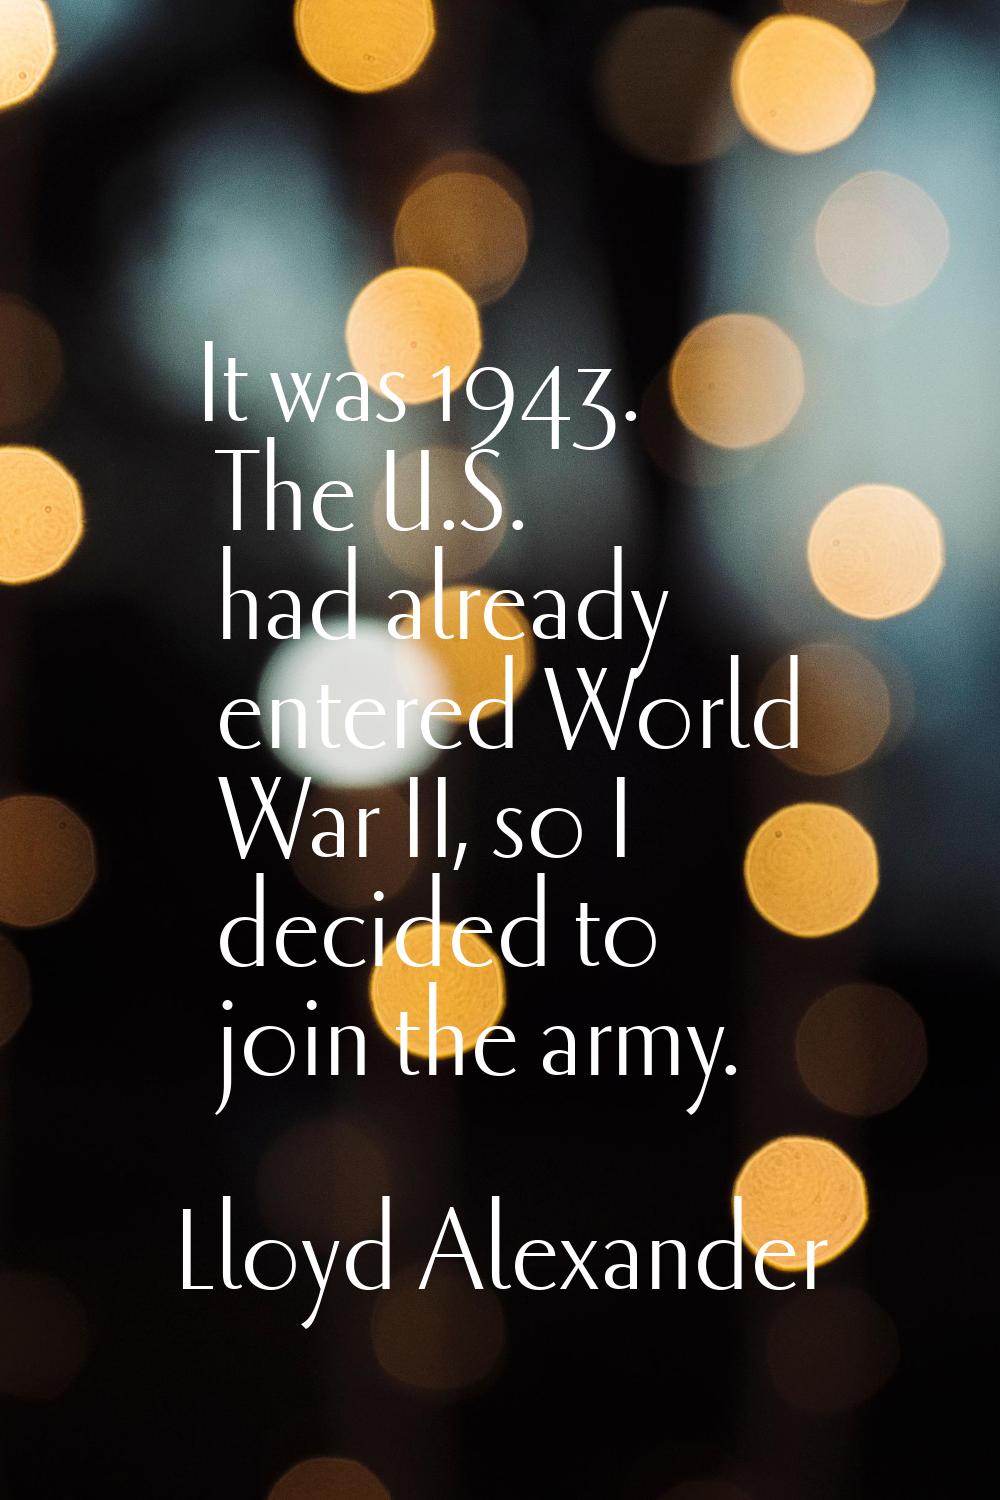 It was 1943. The U.S. had already entered World War II, so I decided to join the army.